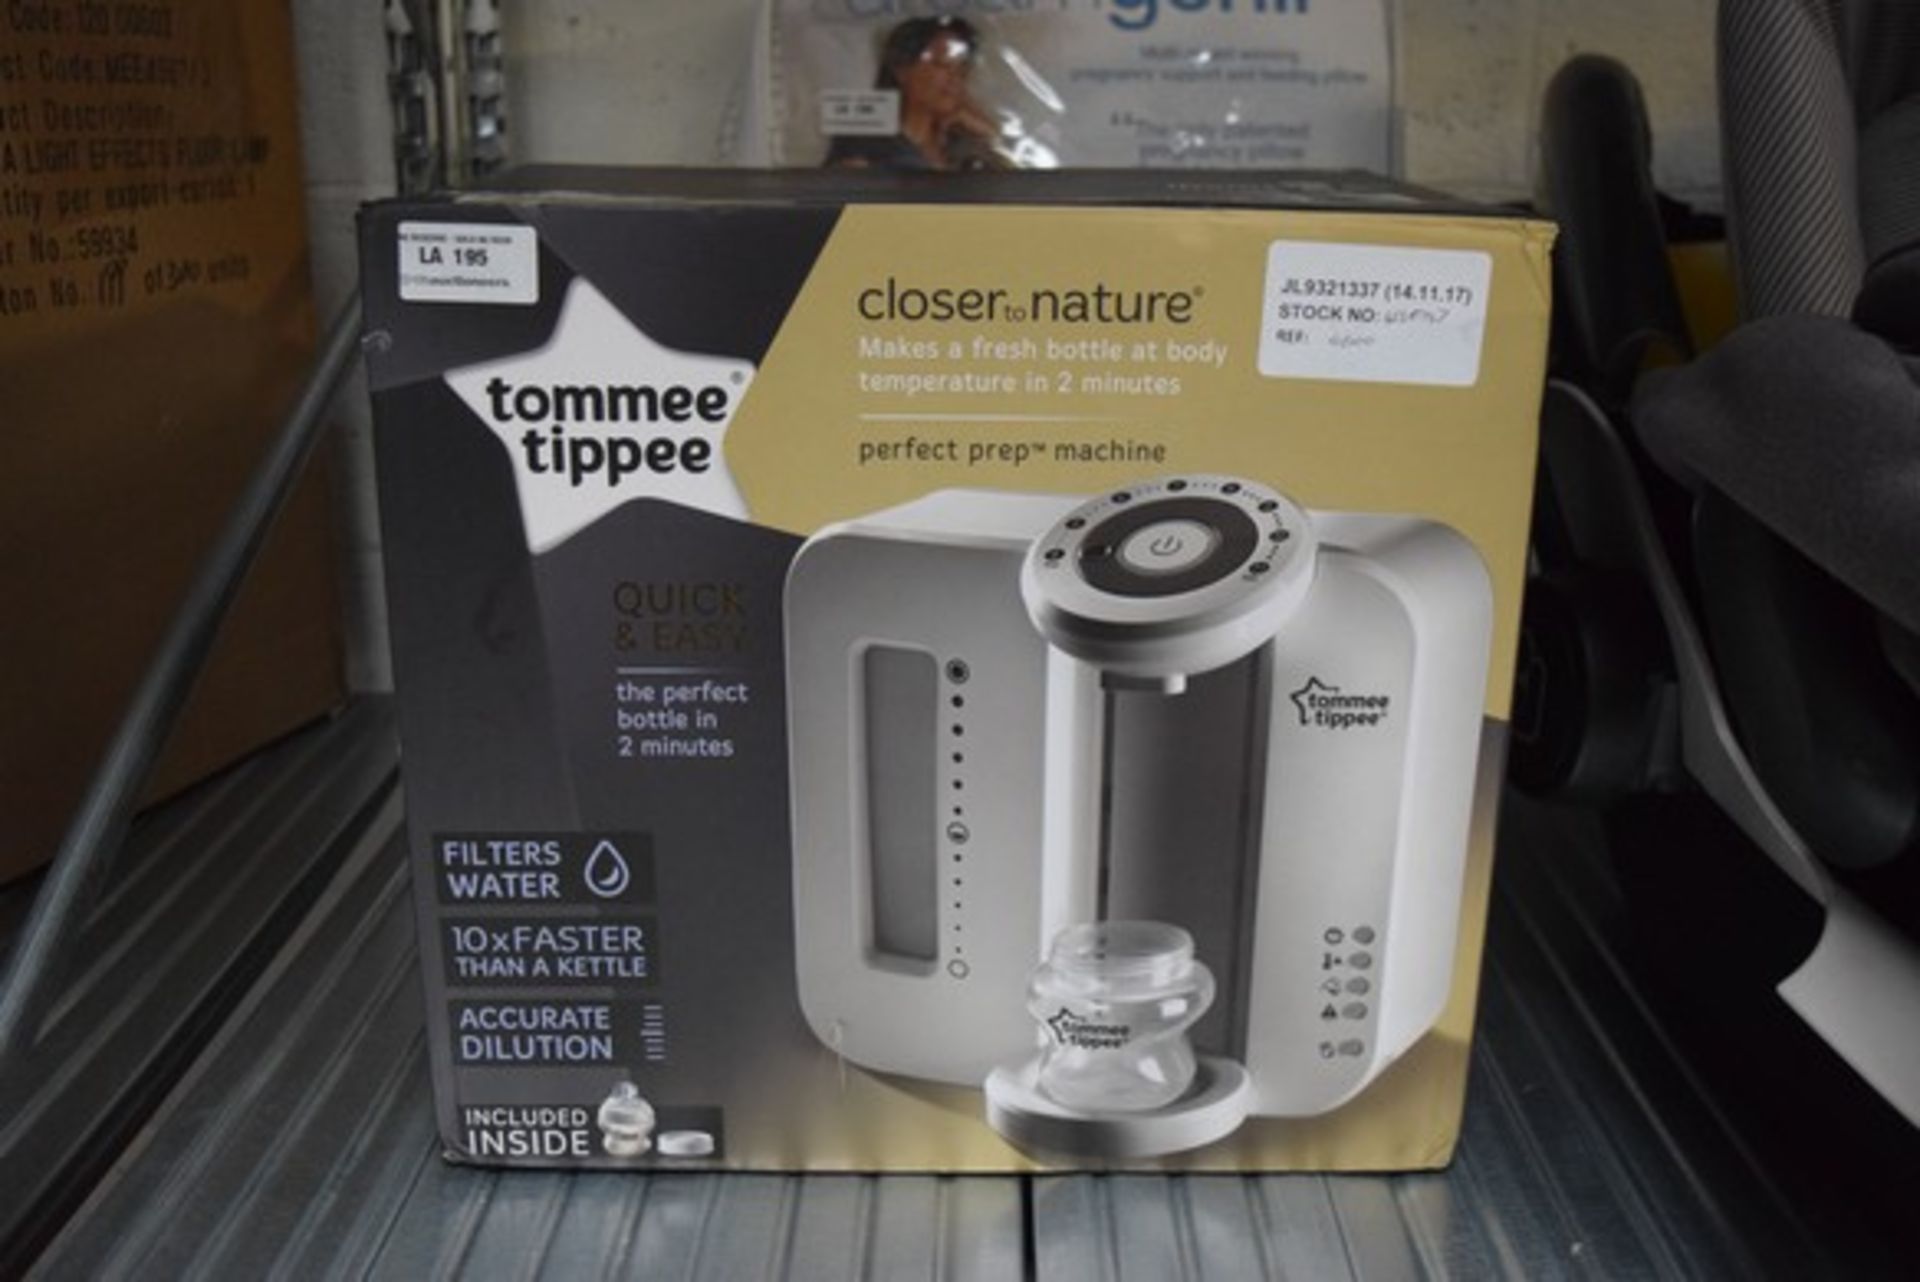 1 X BOXED TOMMEE TIPPEE CLOSER TO NATURE PERFECT PREP MACHINE RRP £60 14.11.17 4136147 W195